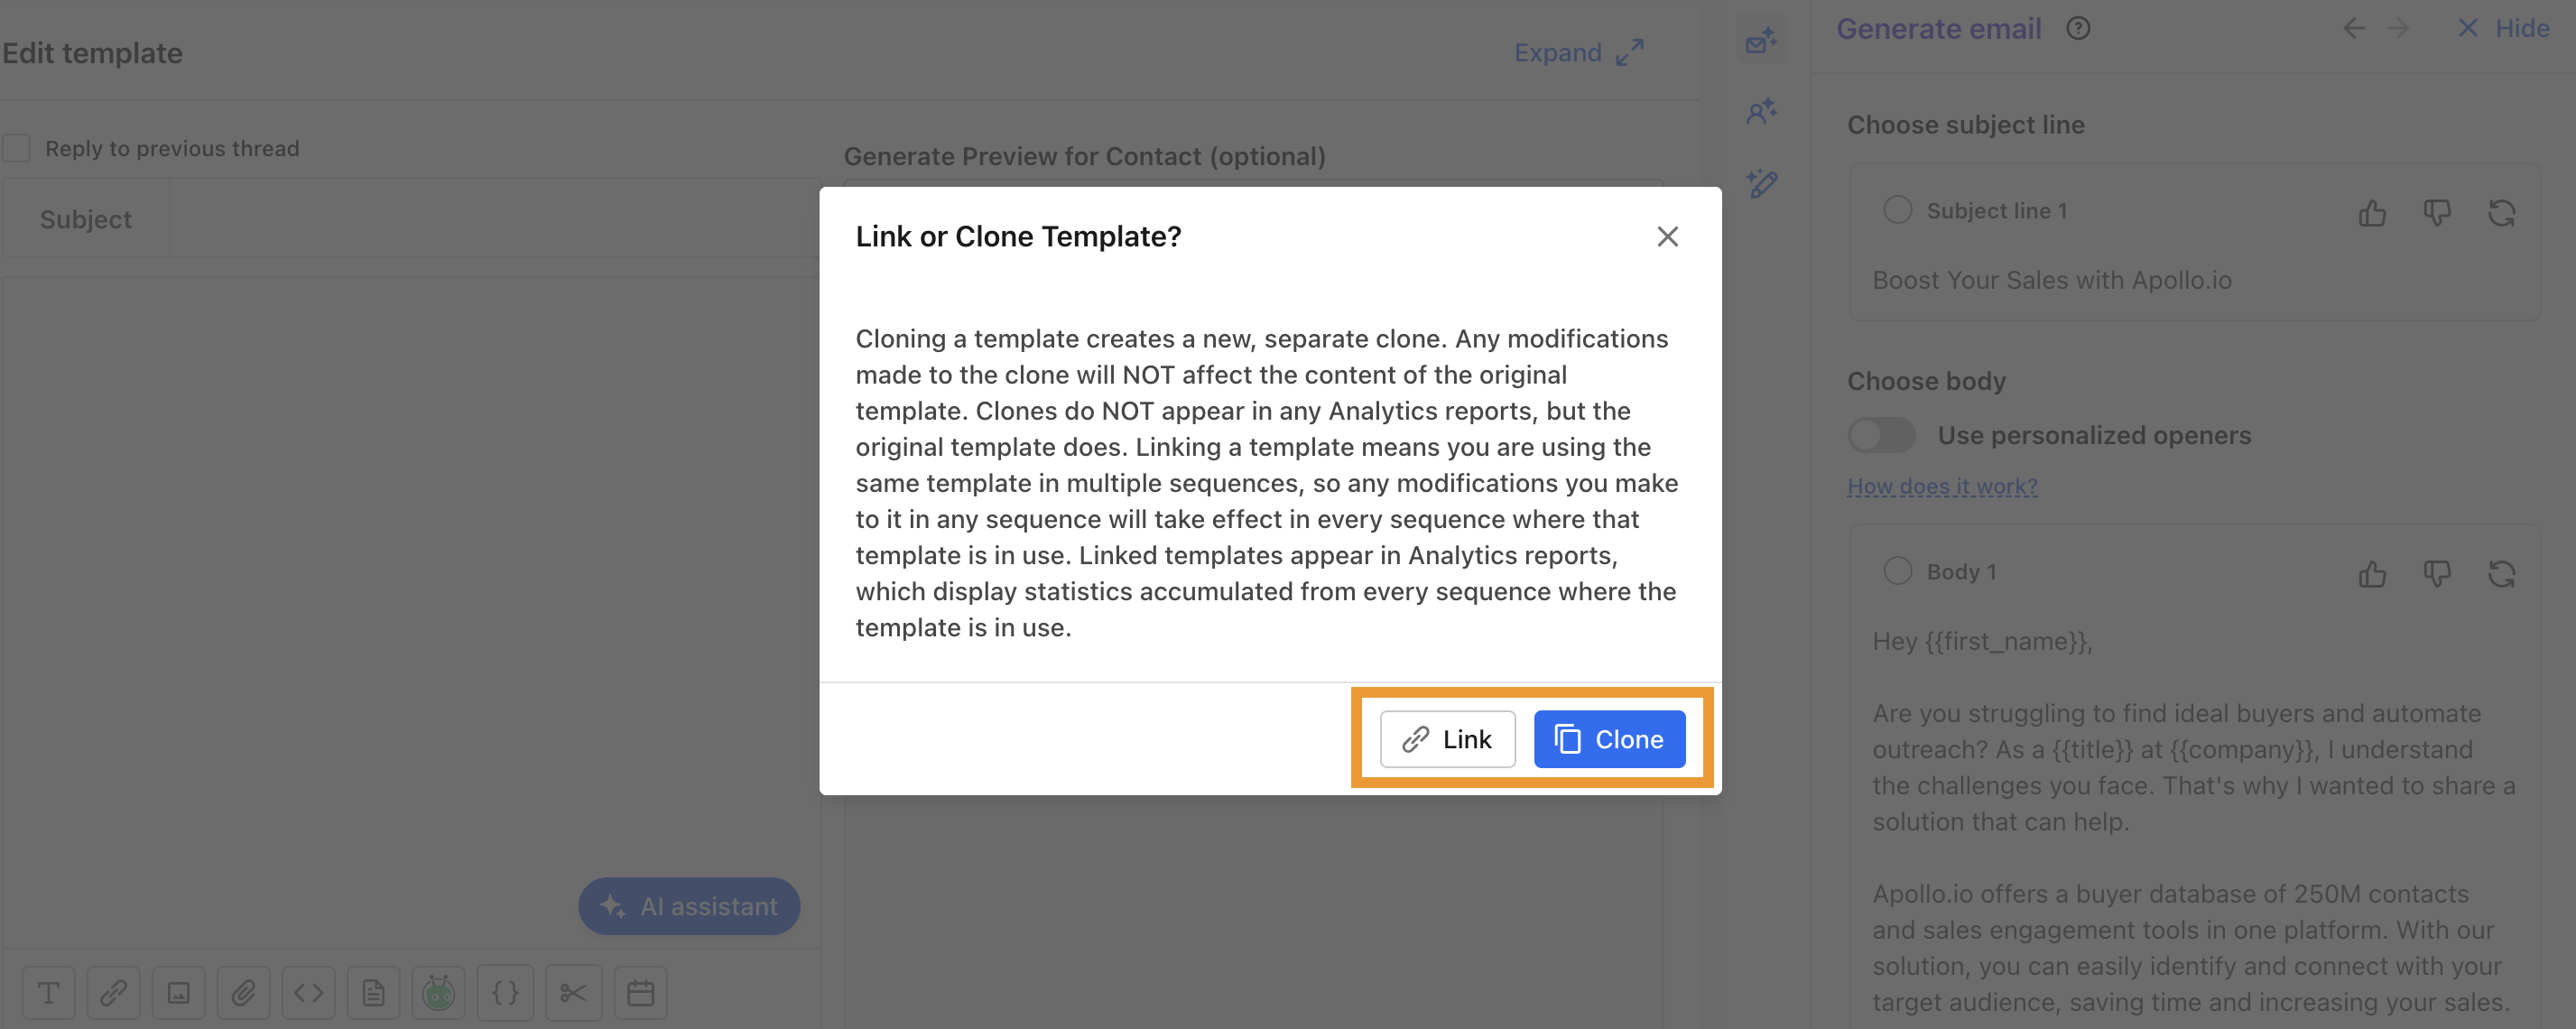 Clone or link the email template.